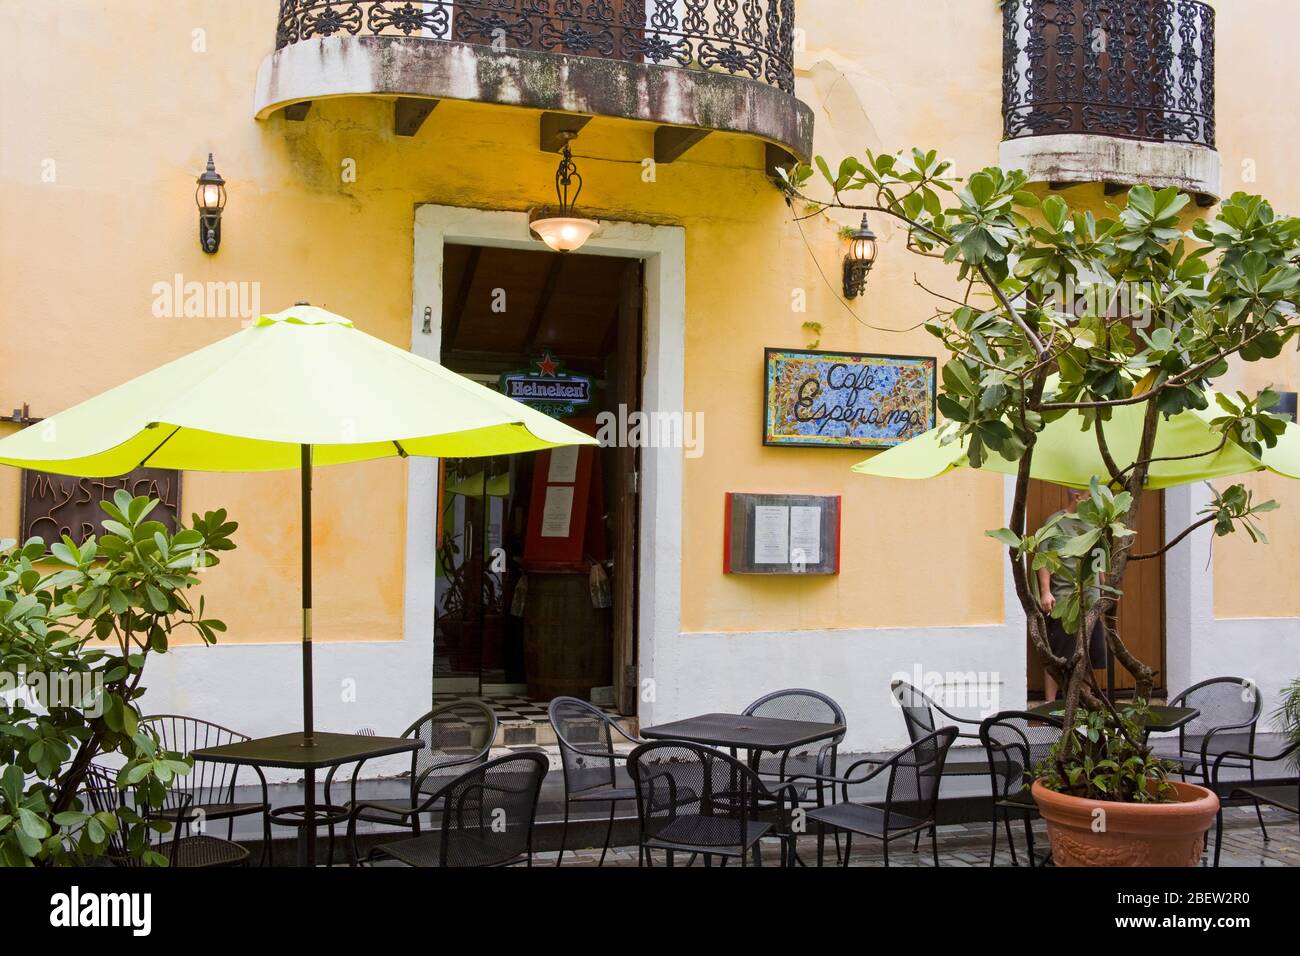 Cafe in Old San Juan, Puerto Rico Island, United States of America Stock Photo